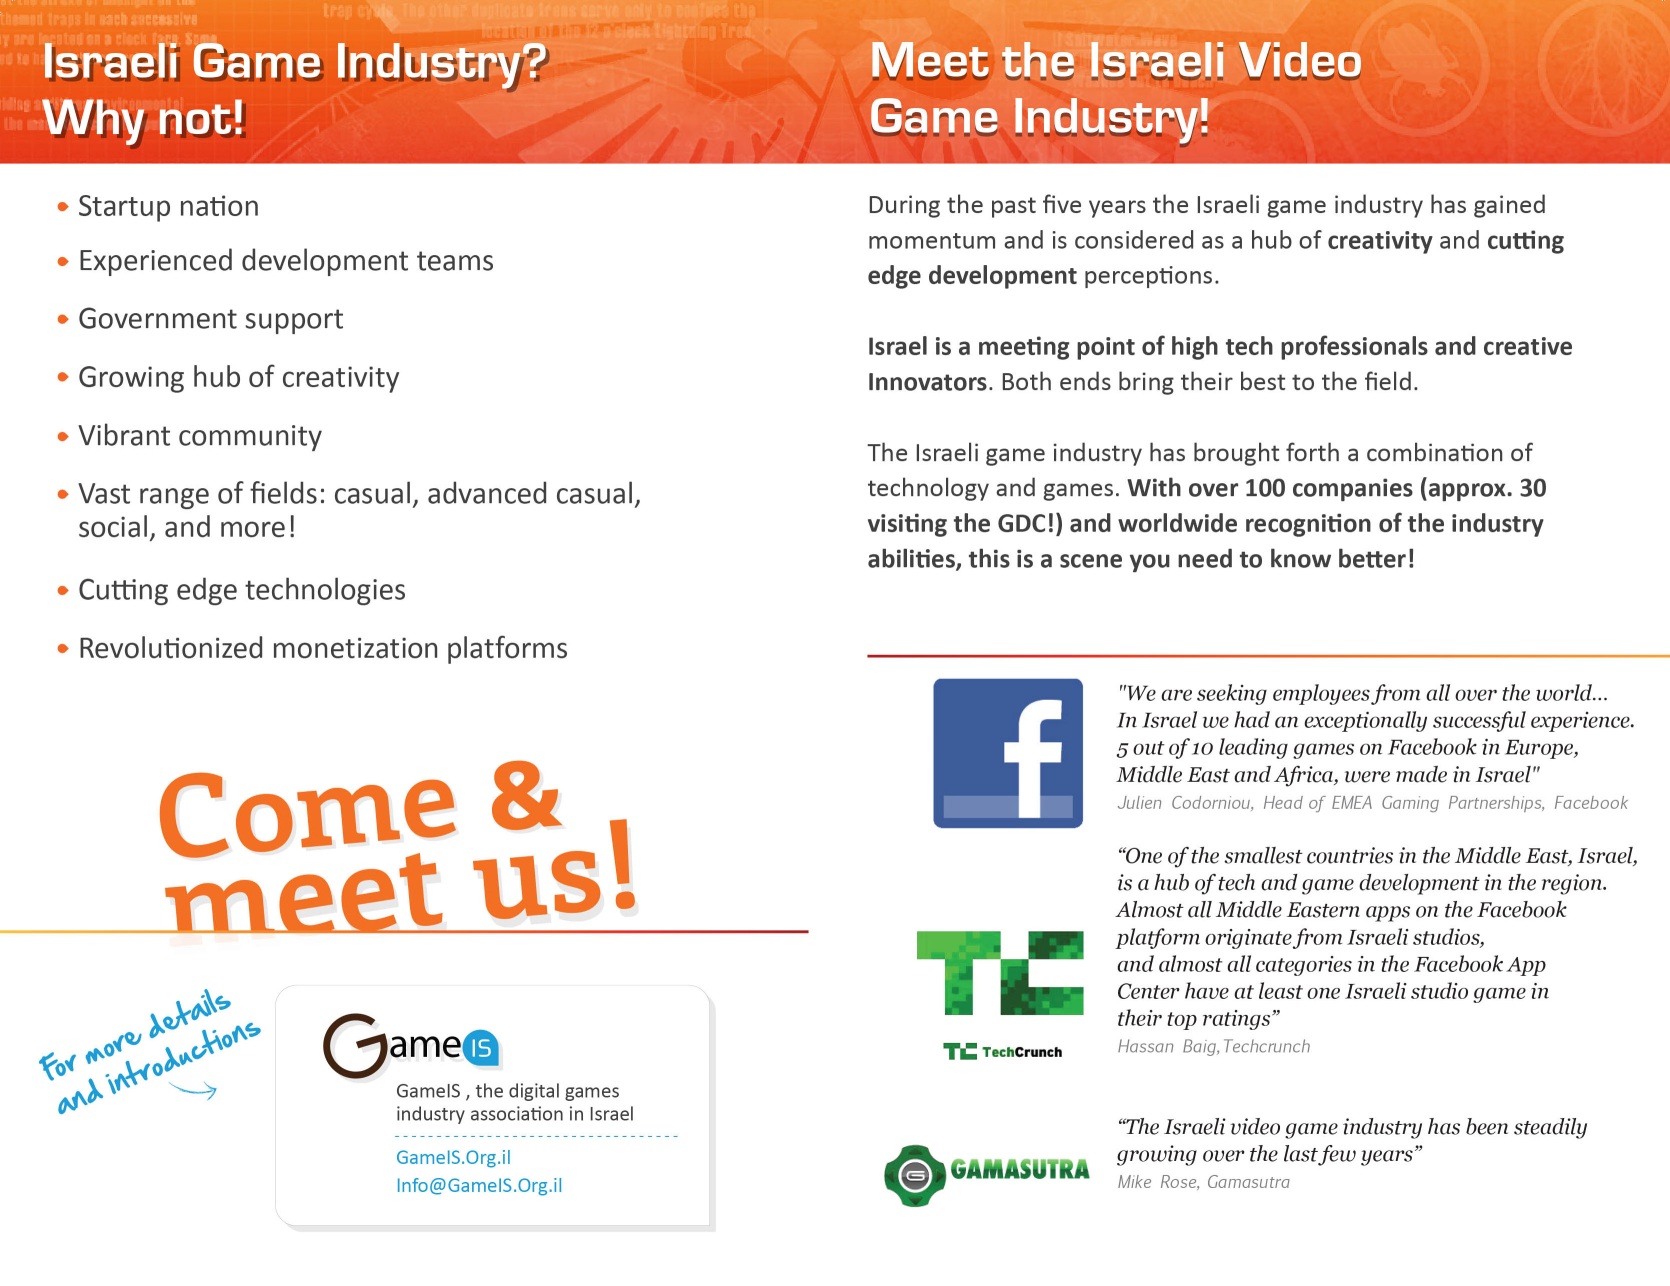 Israeli Video Game Industry - click to enlarge